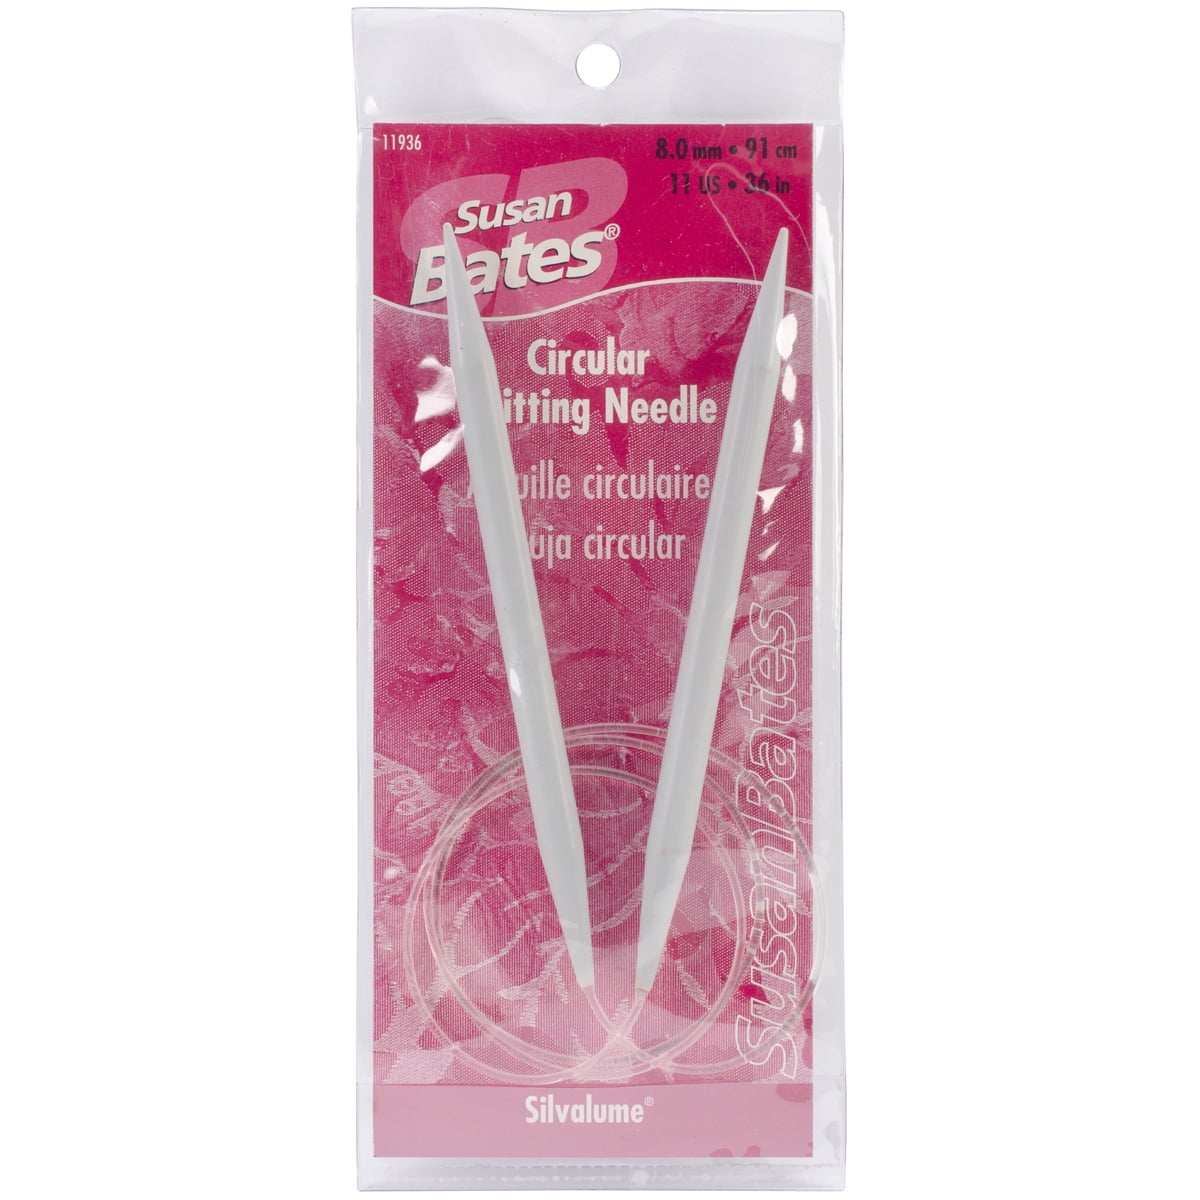 Chrome Quilting Needles Size 75/11 - 036346140353